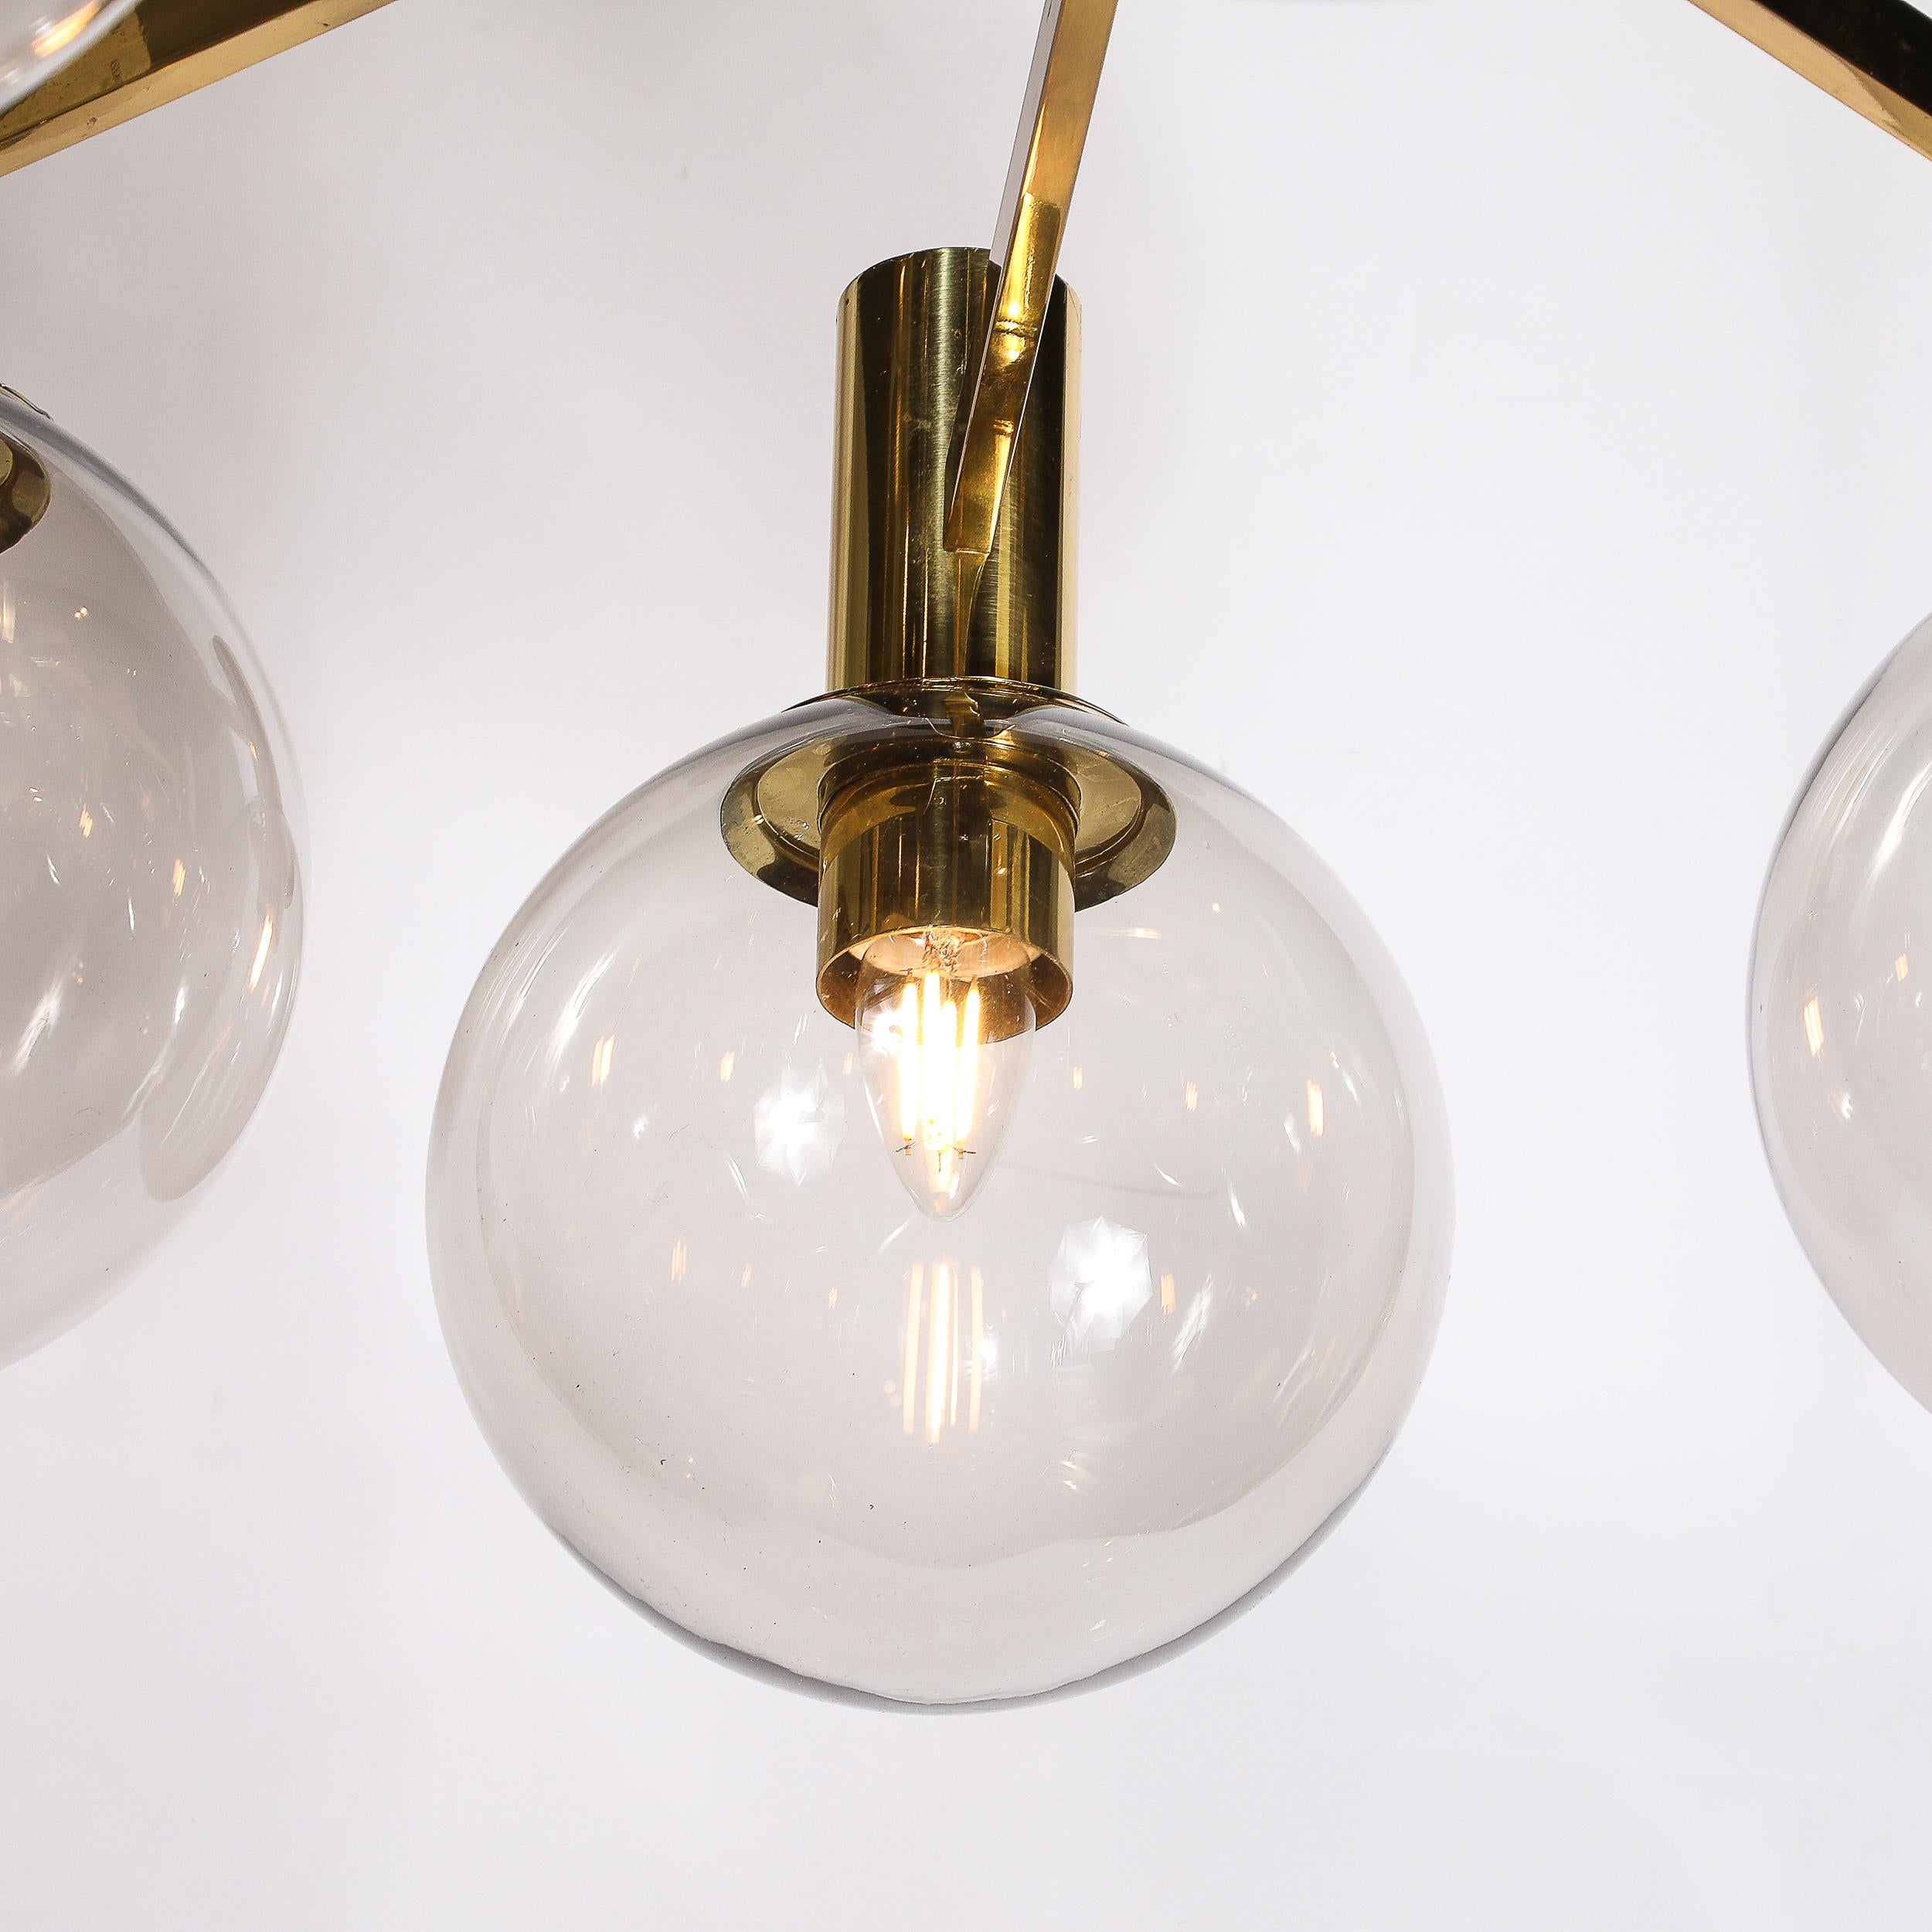 Mid-20th Century Mid-Century Modernist 8-Globe Polished Brass Chandelier by Hans Agne Jakobsson For Sale